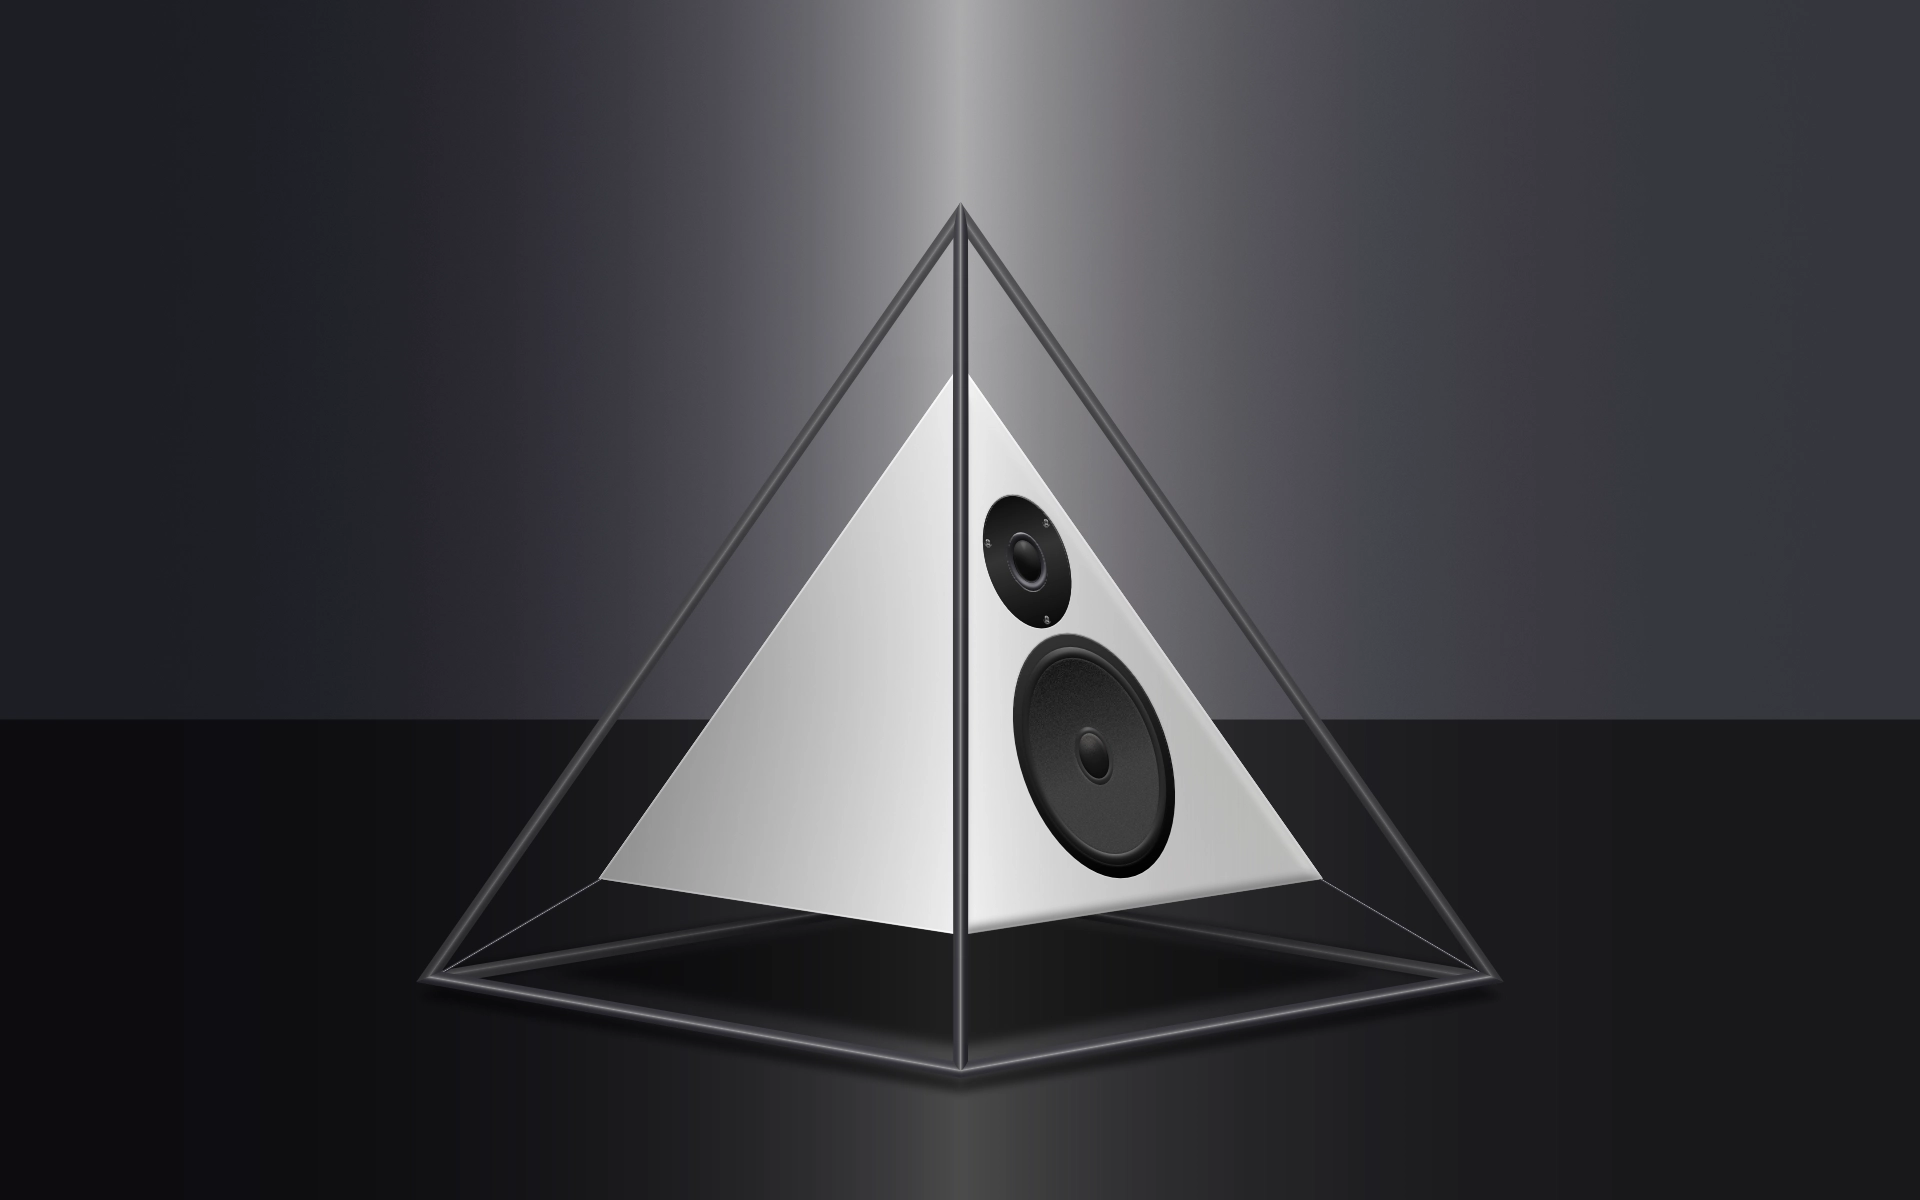 The Pyramid² speaker was designed in 1982